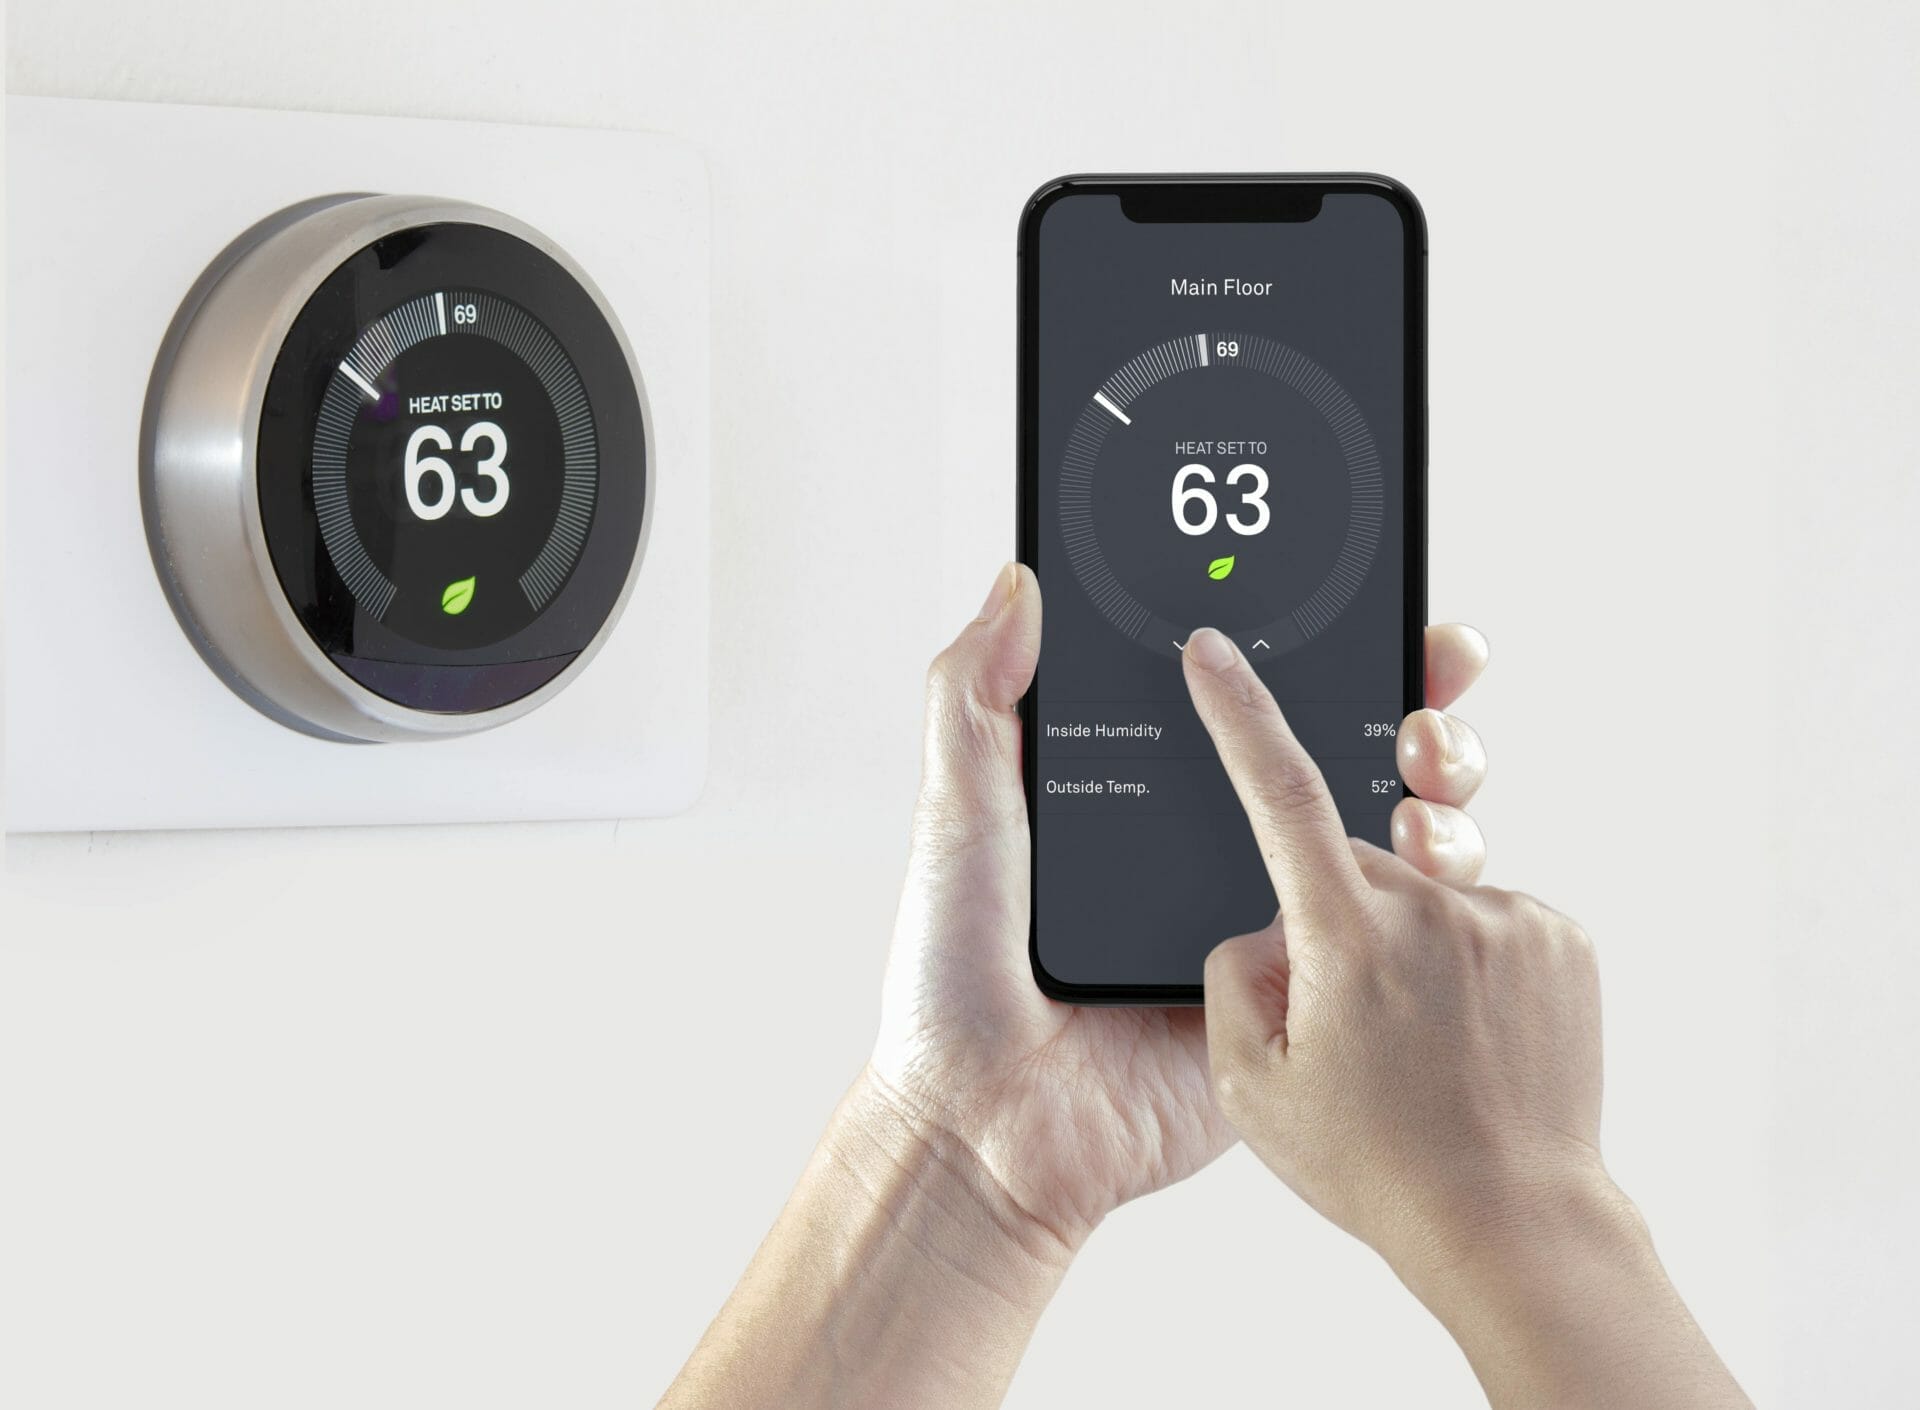 Interested in Smart Home Technology? Read This Before Any DIY Project